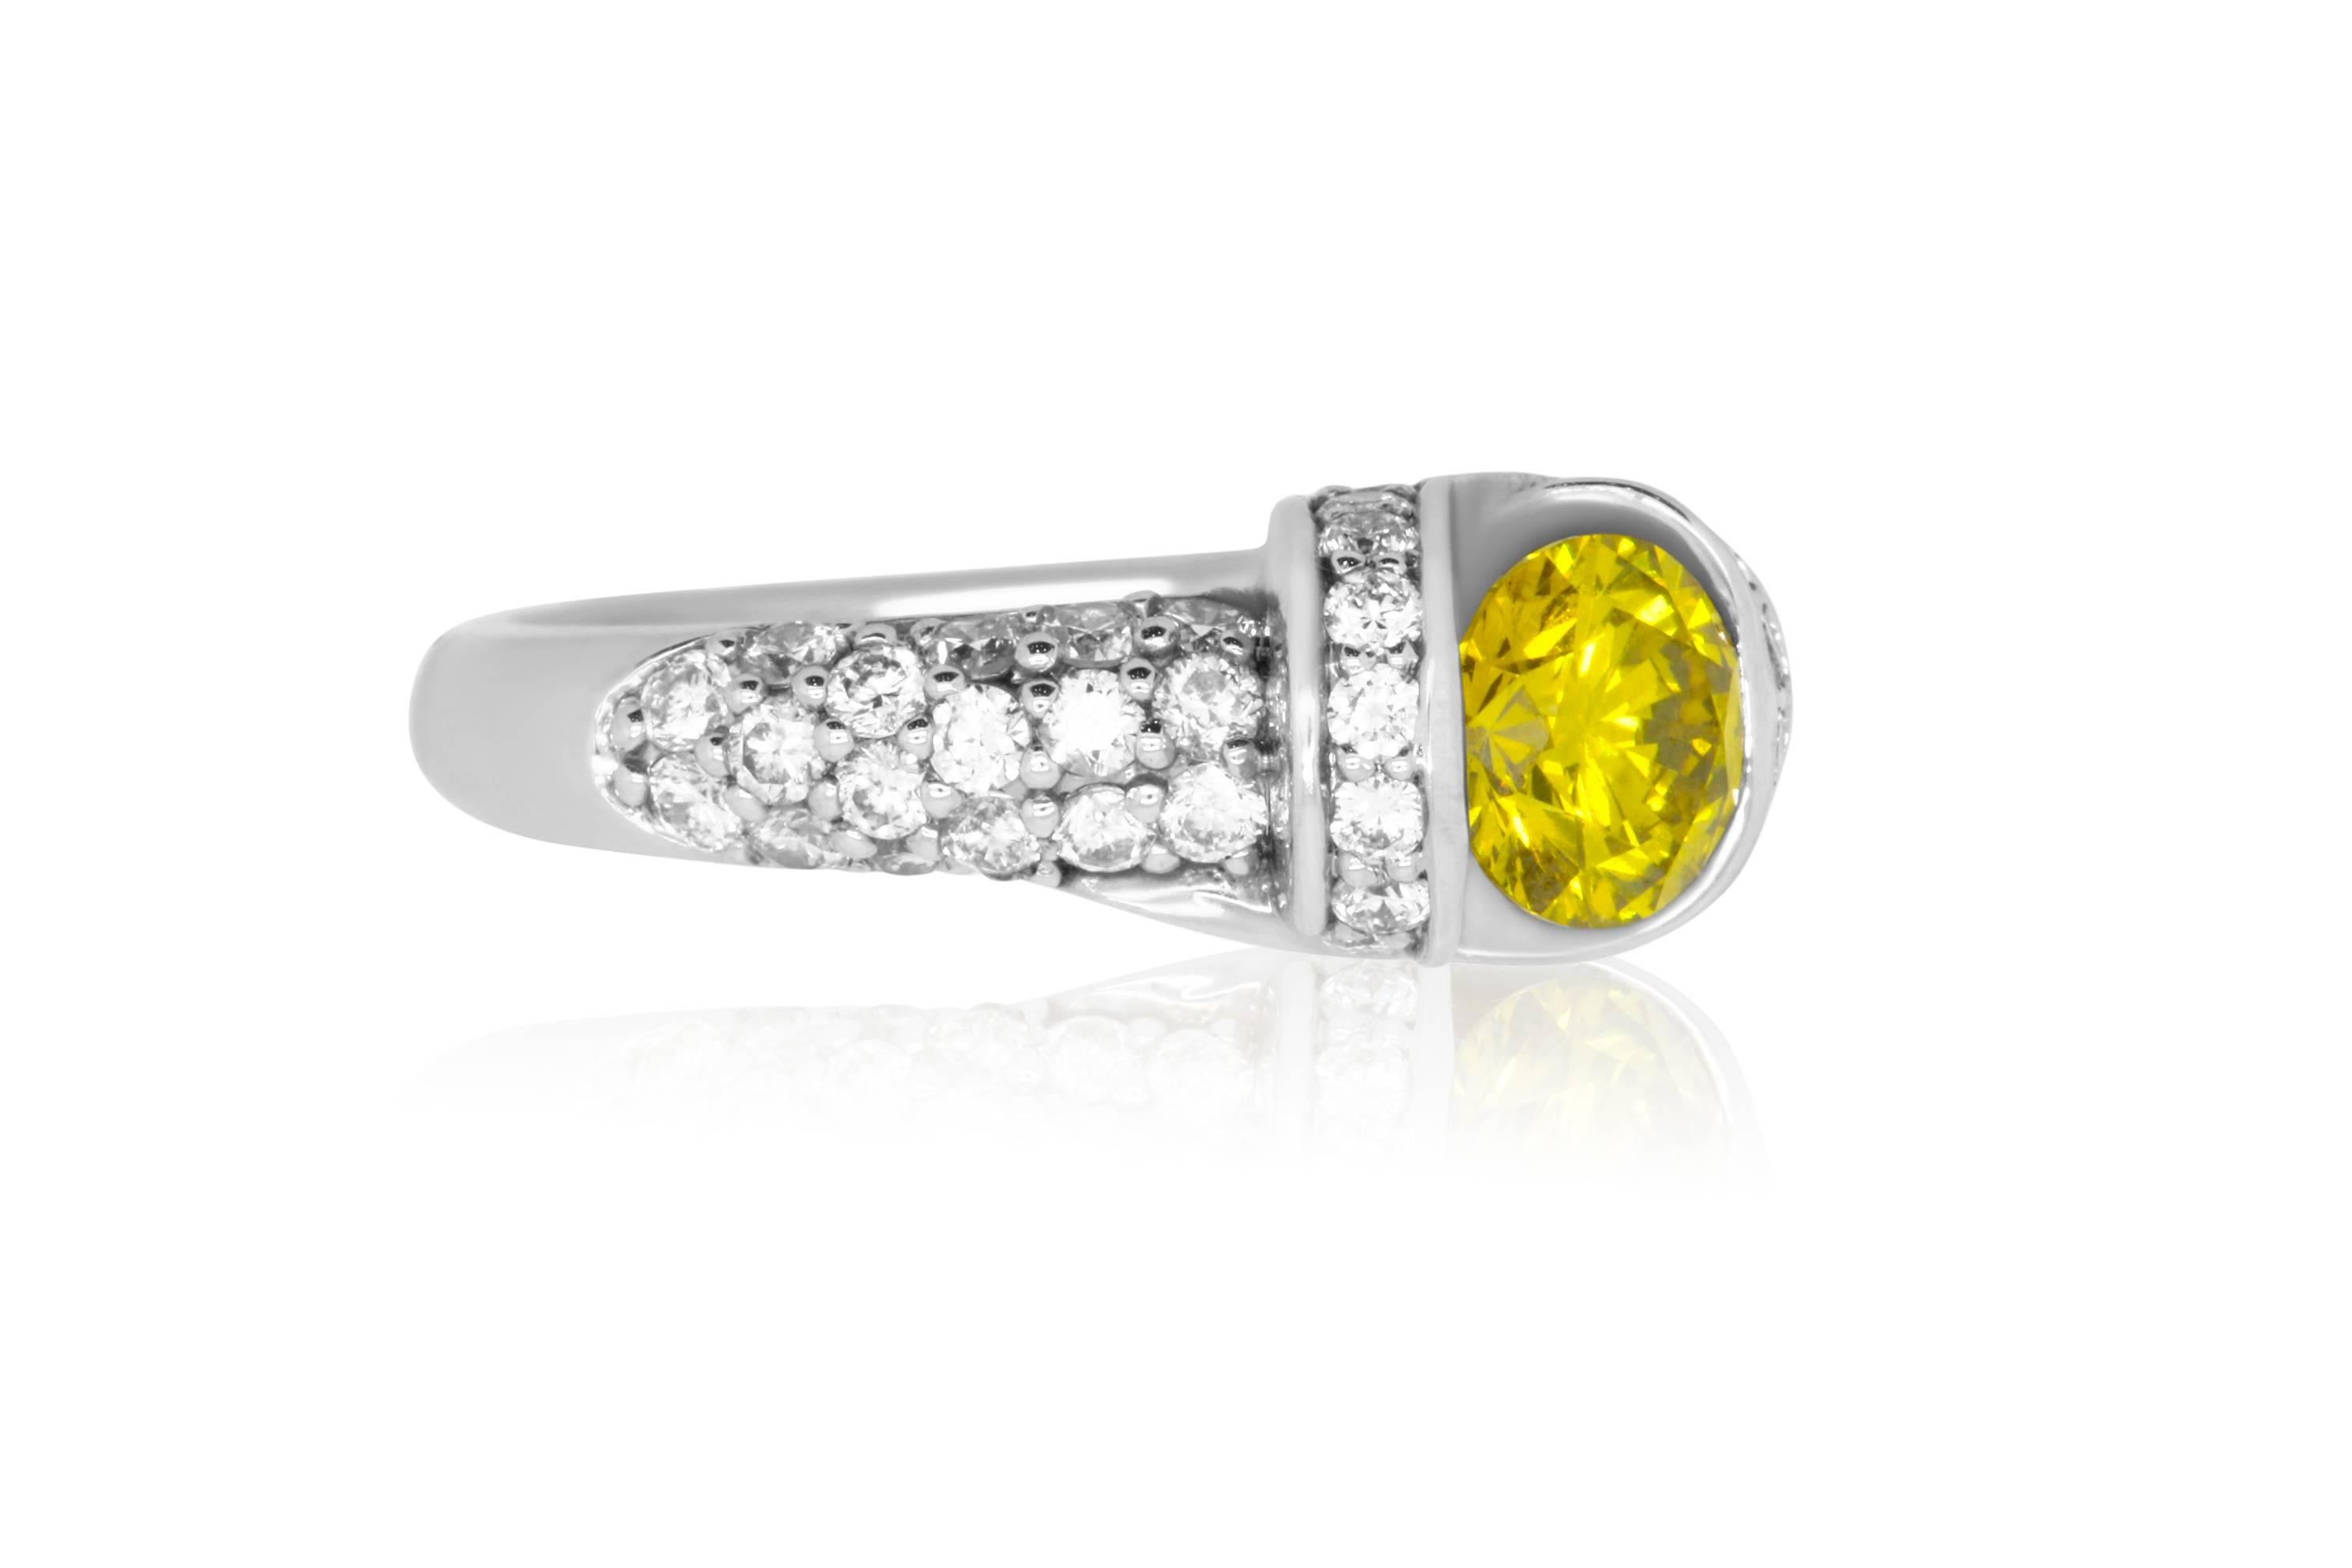 Material: 18k White Gold 
Center Stone Details: 1.16 Carat Round Yellow Diamond
Mounting Diamond Details: 56 White Diamonds at 1.32 Carats - Clarity: SI Color: H-I
Ring Size: Size 6.75 (can be sized)

Fine one-of-a kind craftsmanship meets